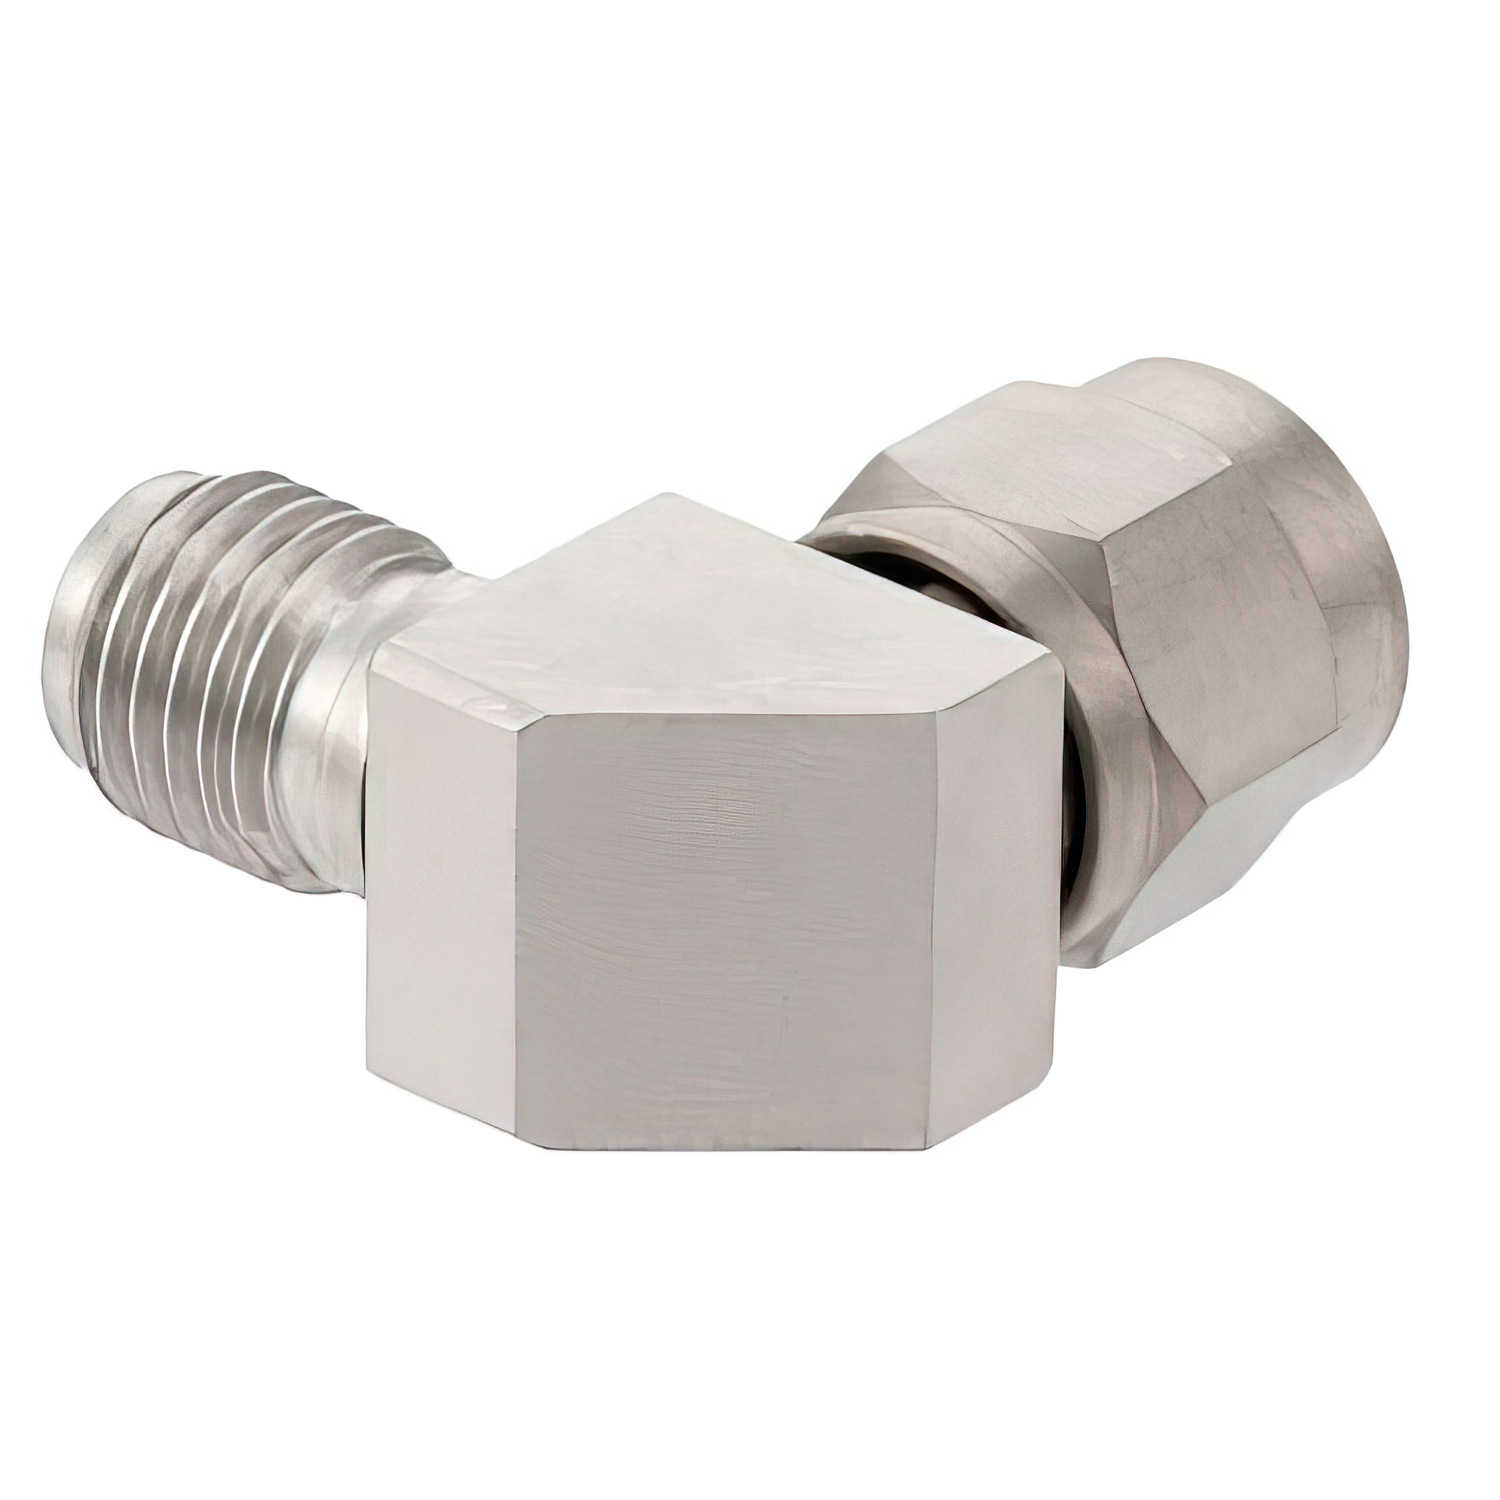 1.85mm Male to 2.92mm Female Right Angle Adapter1